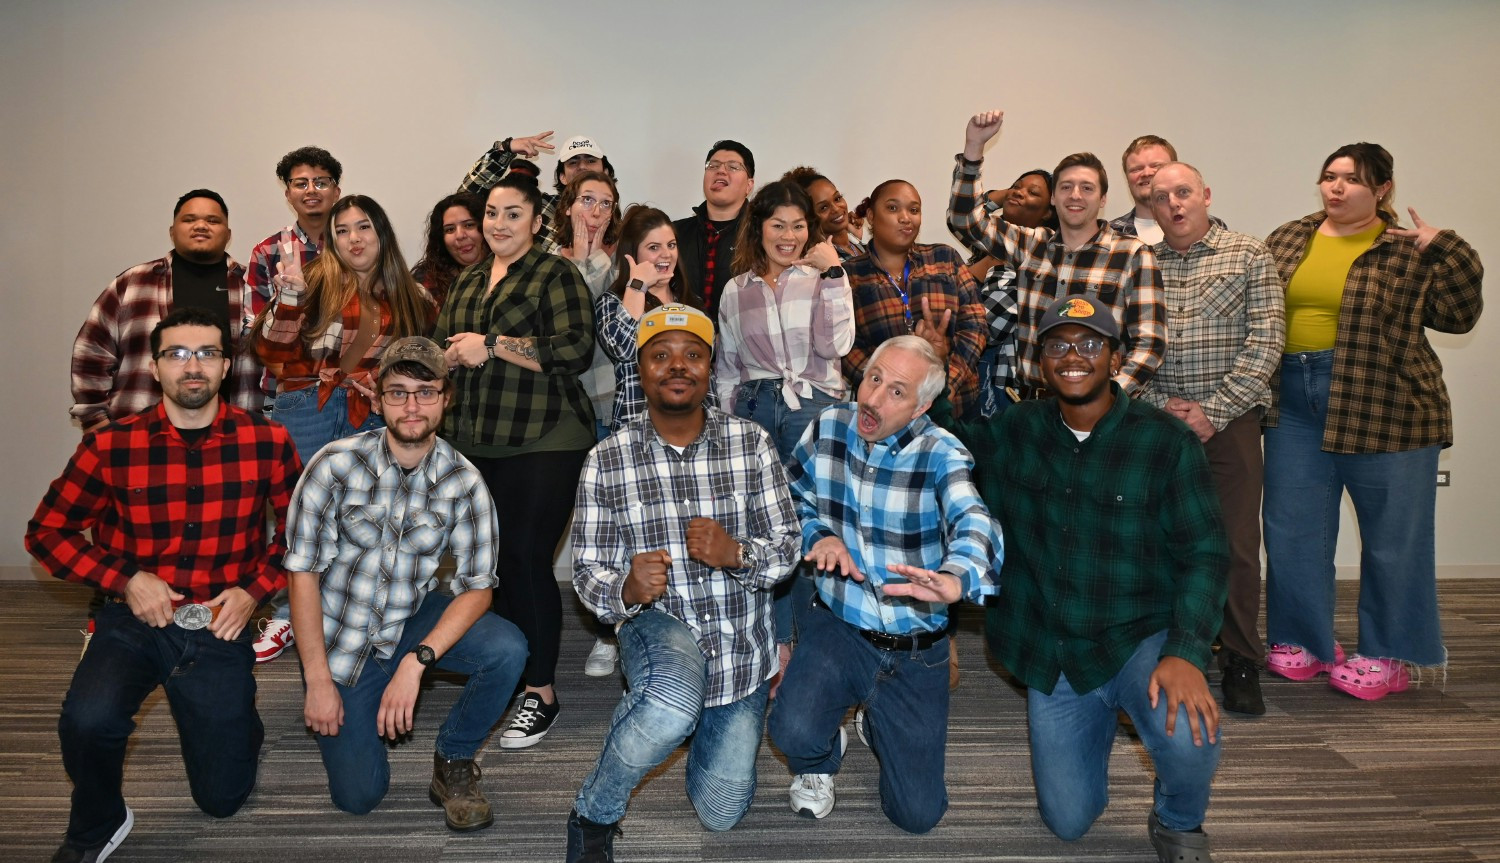 Members of our Call Center/Marketing team showing off their flannels on Flannel Friday!